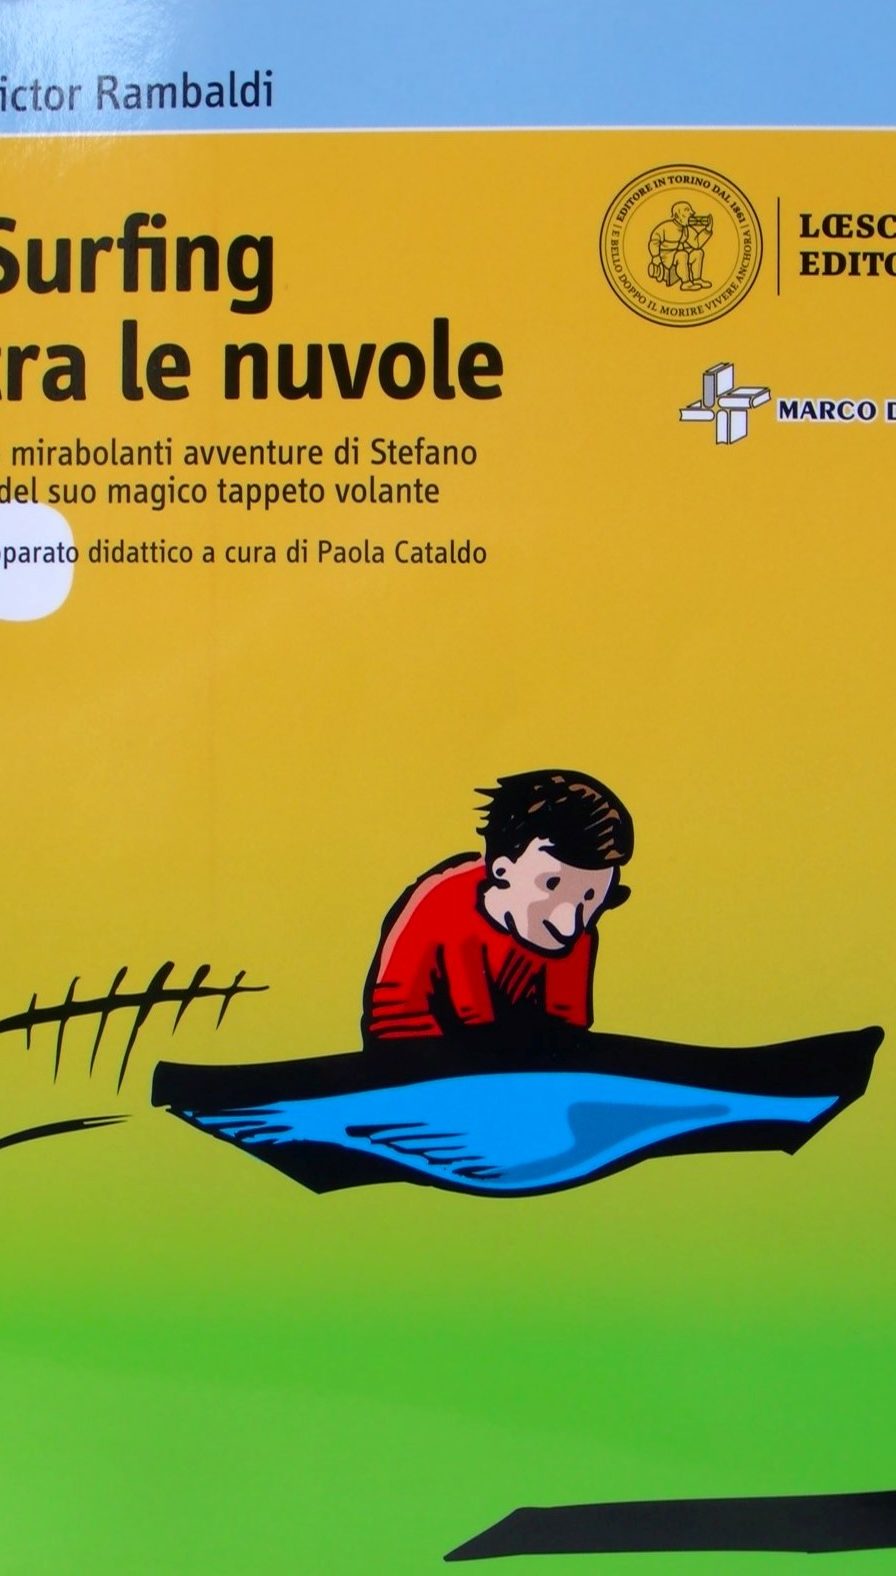 (2018) Surfing tra le nuvole